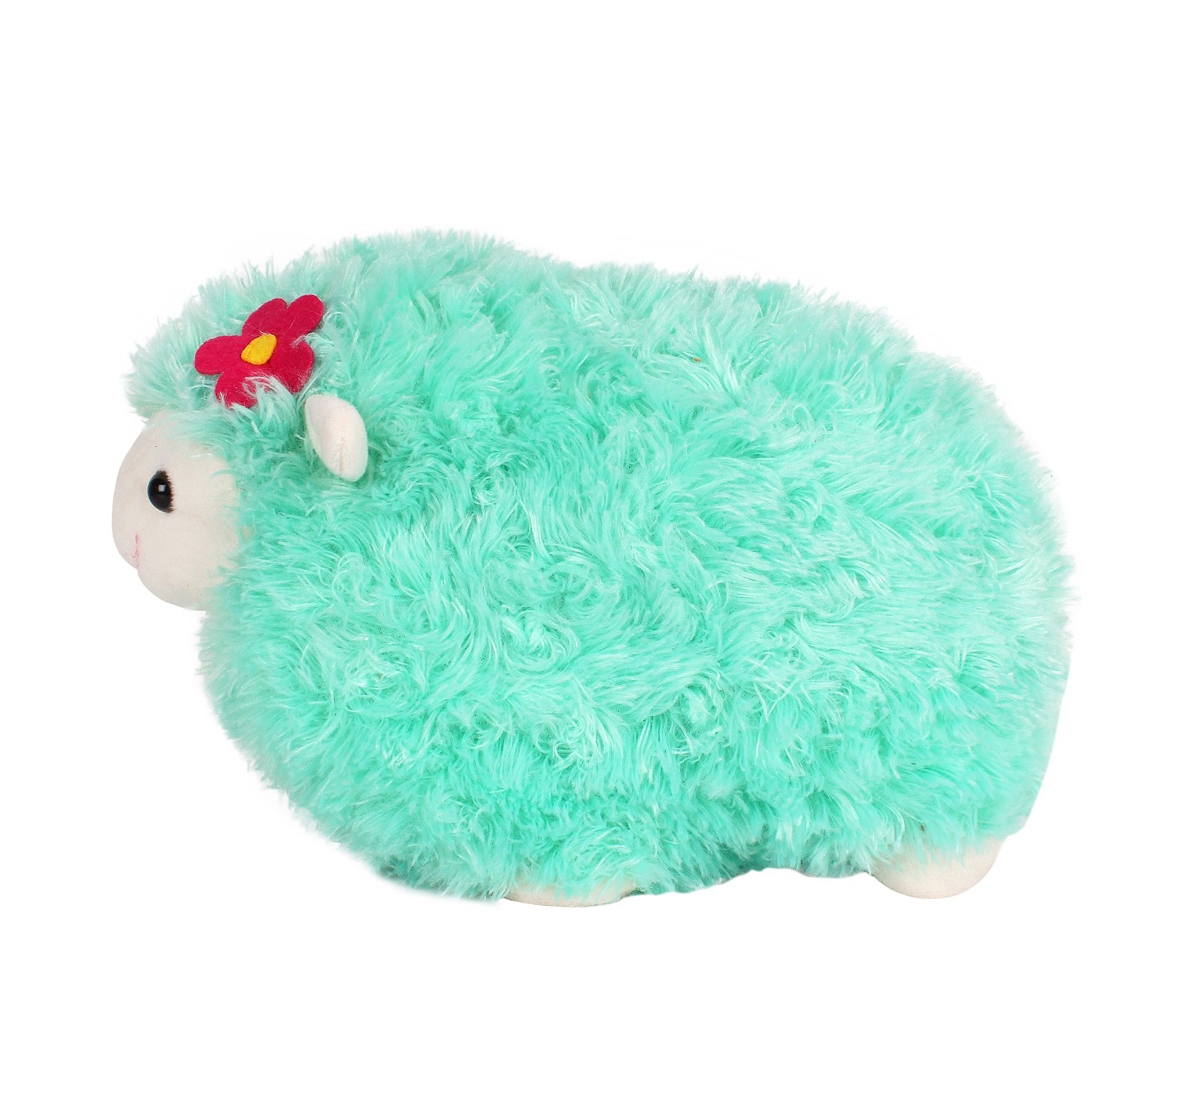 Fuzzbuzz Green Lamb Stuffed Animal - 28Cm Quirky Soft Toys for Kids age 0M+ - 20 Cm (Green)